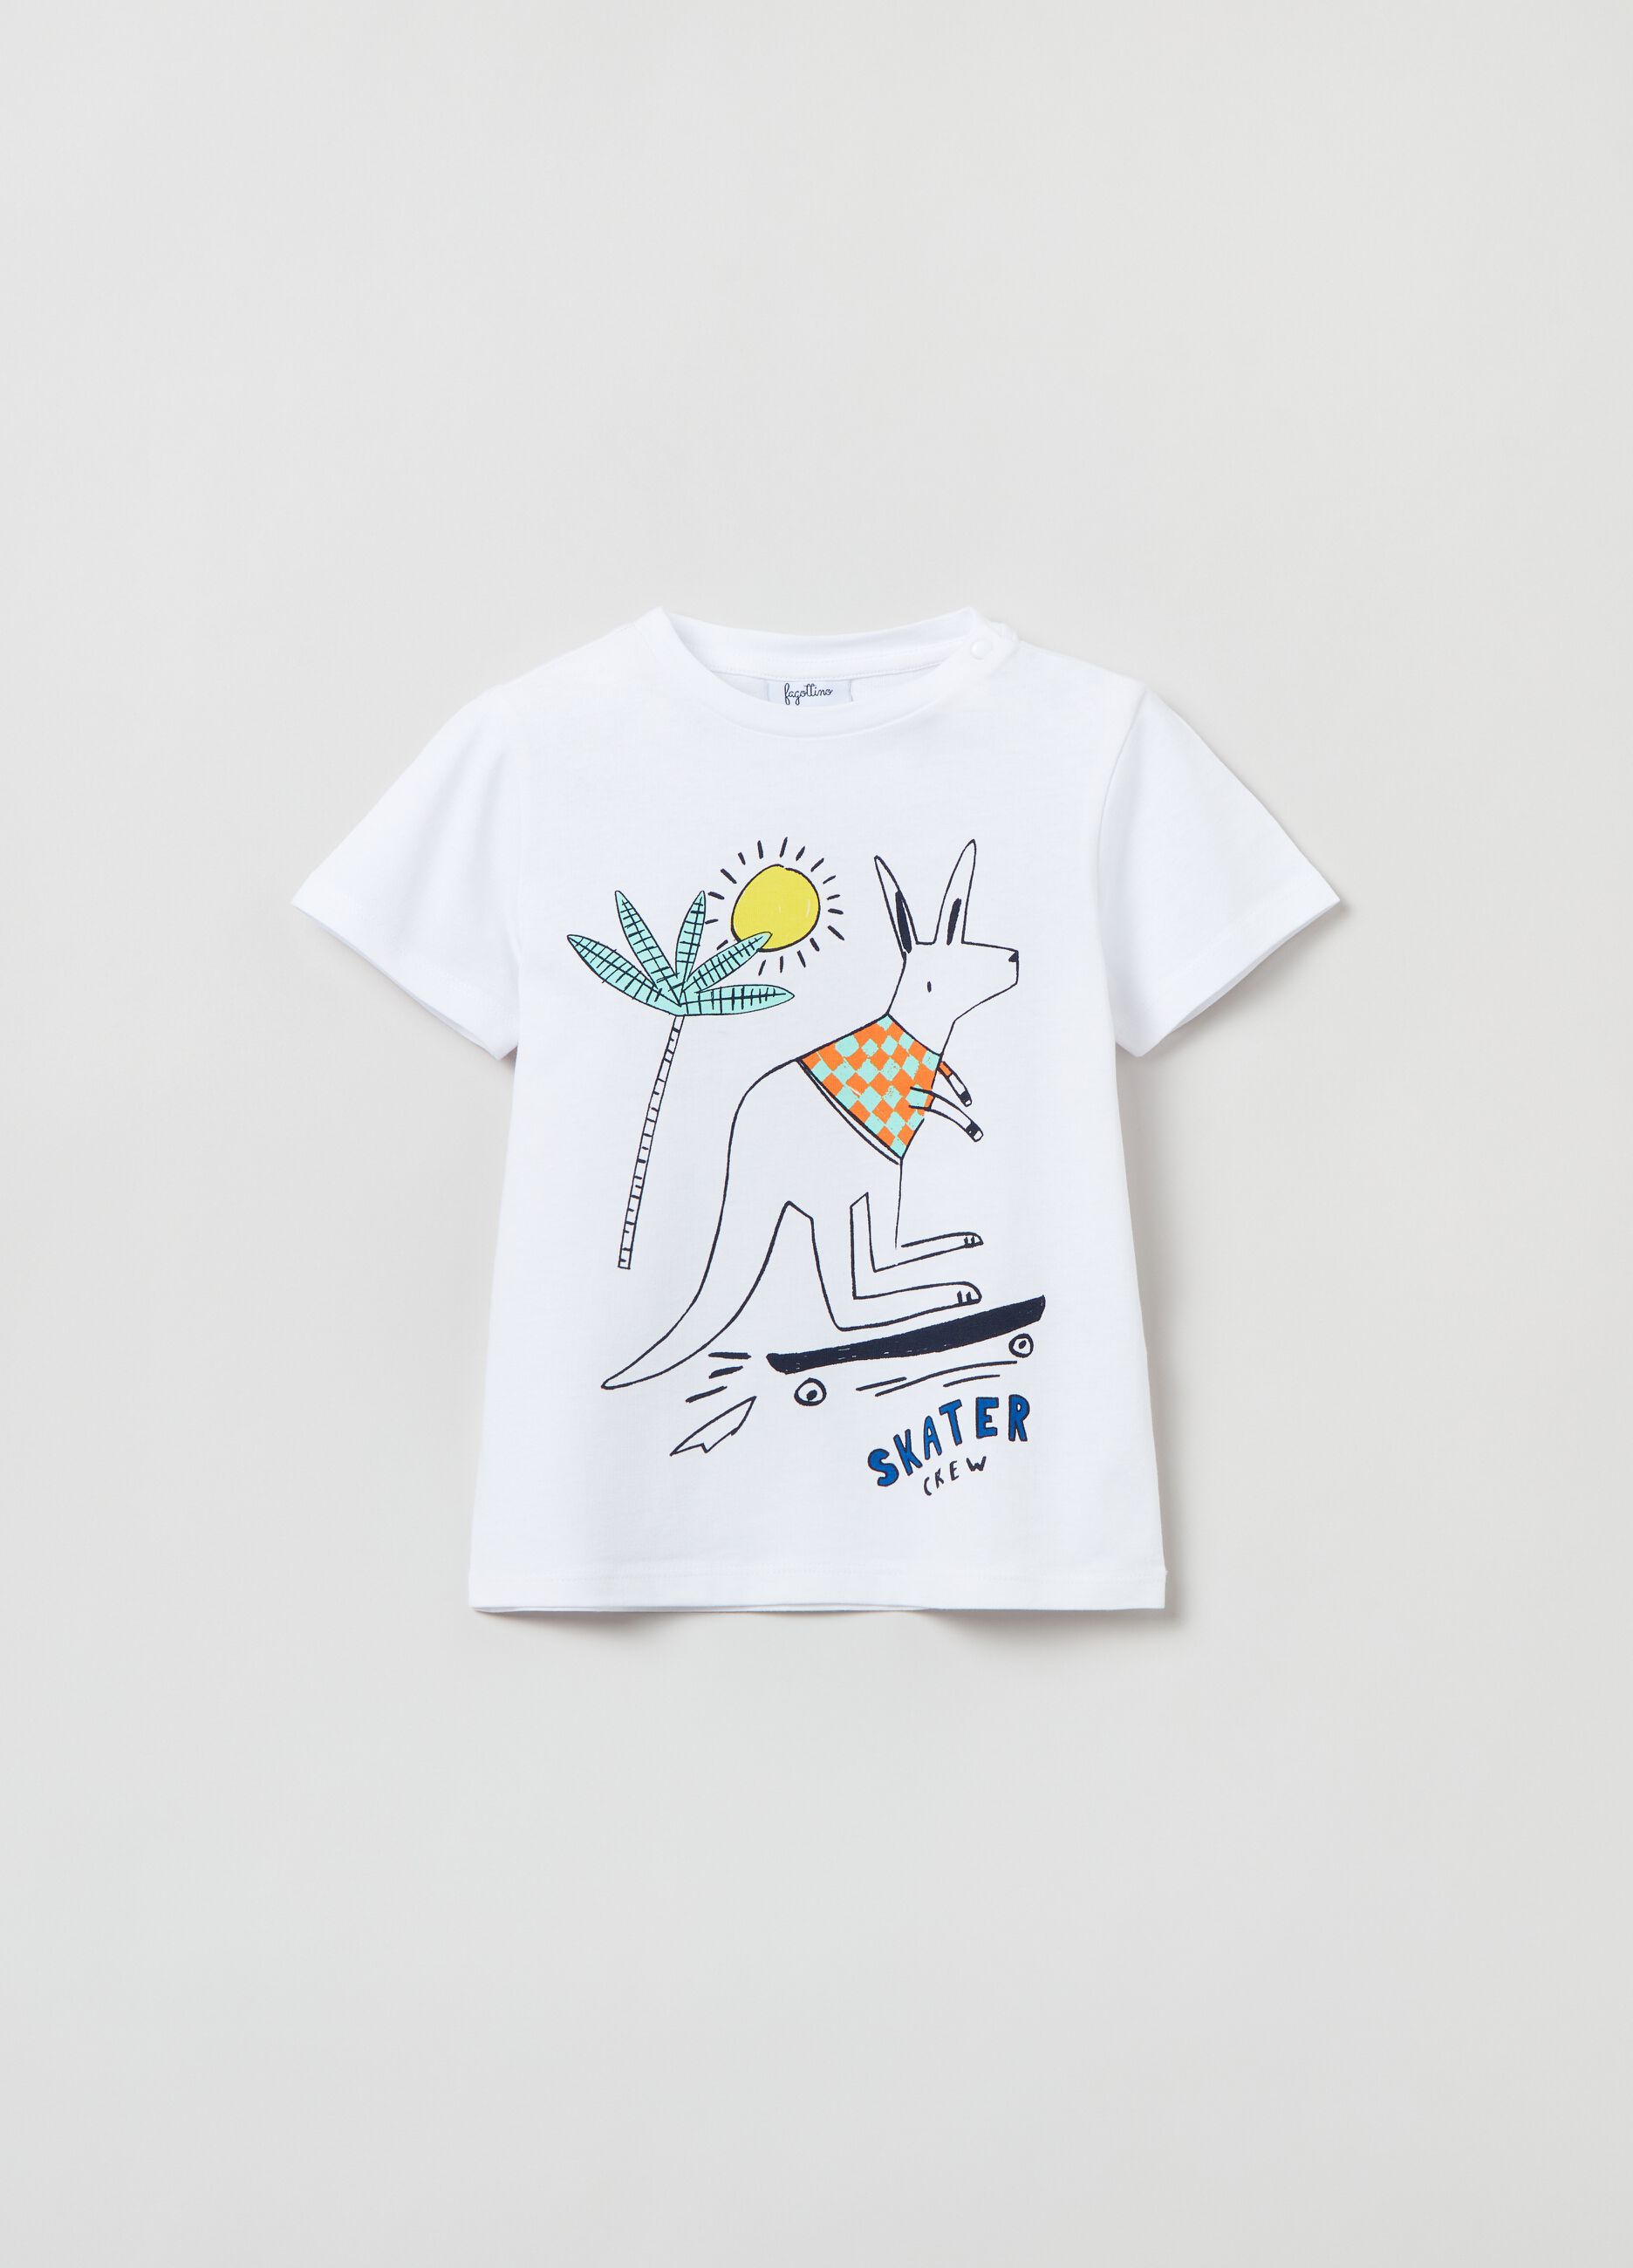 T-shirt in cotone stampa canguro skater